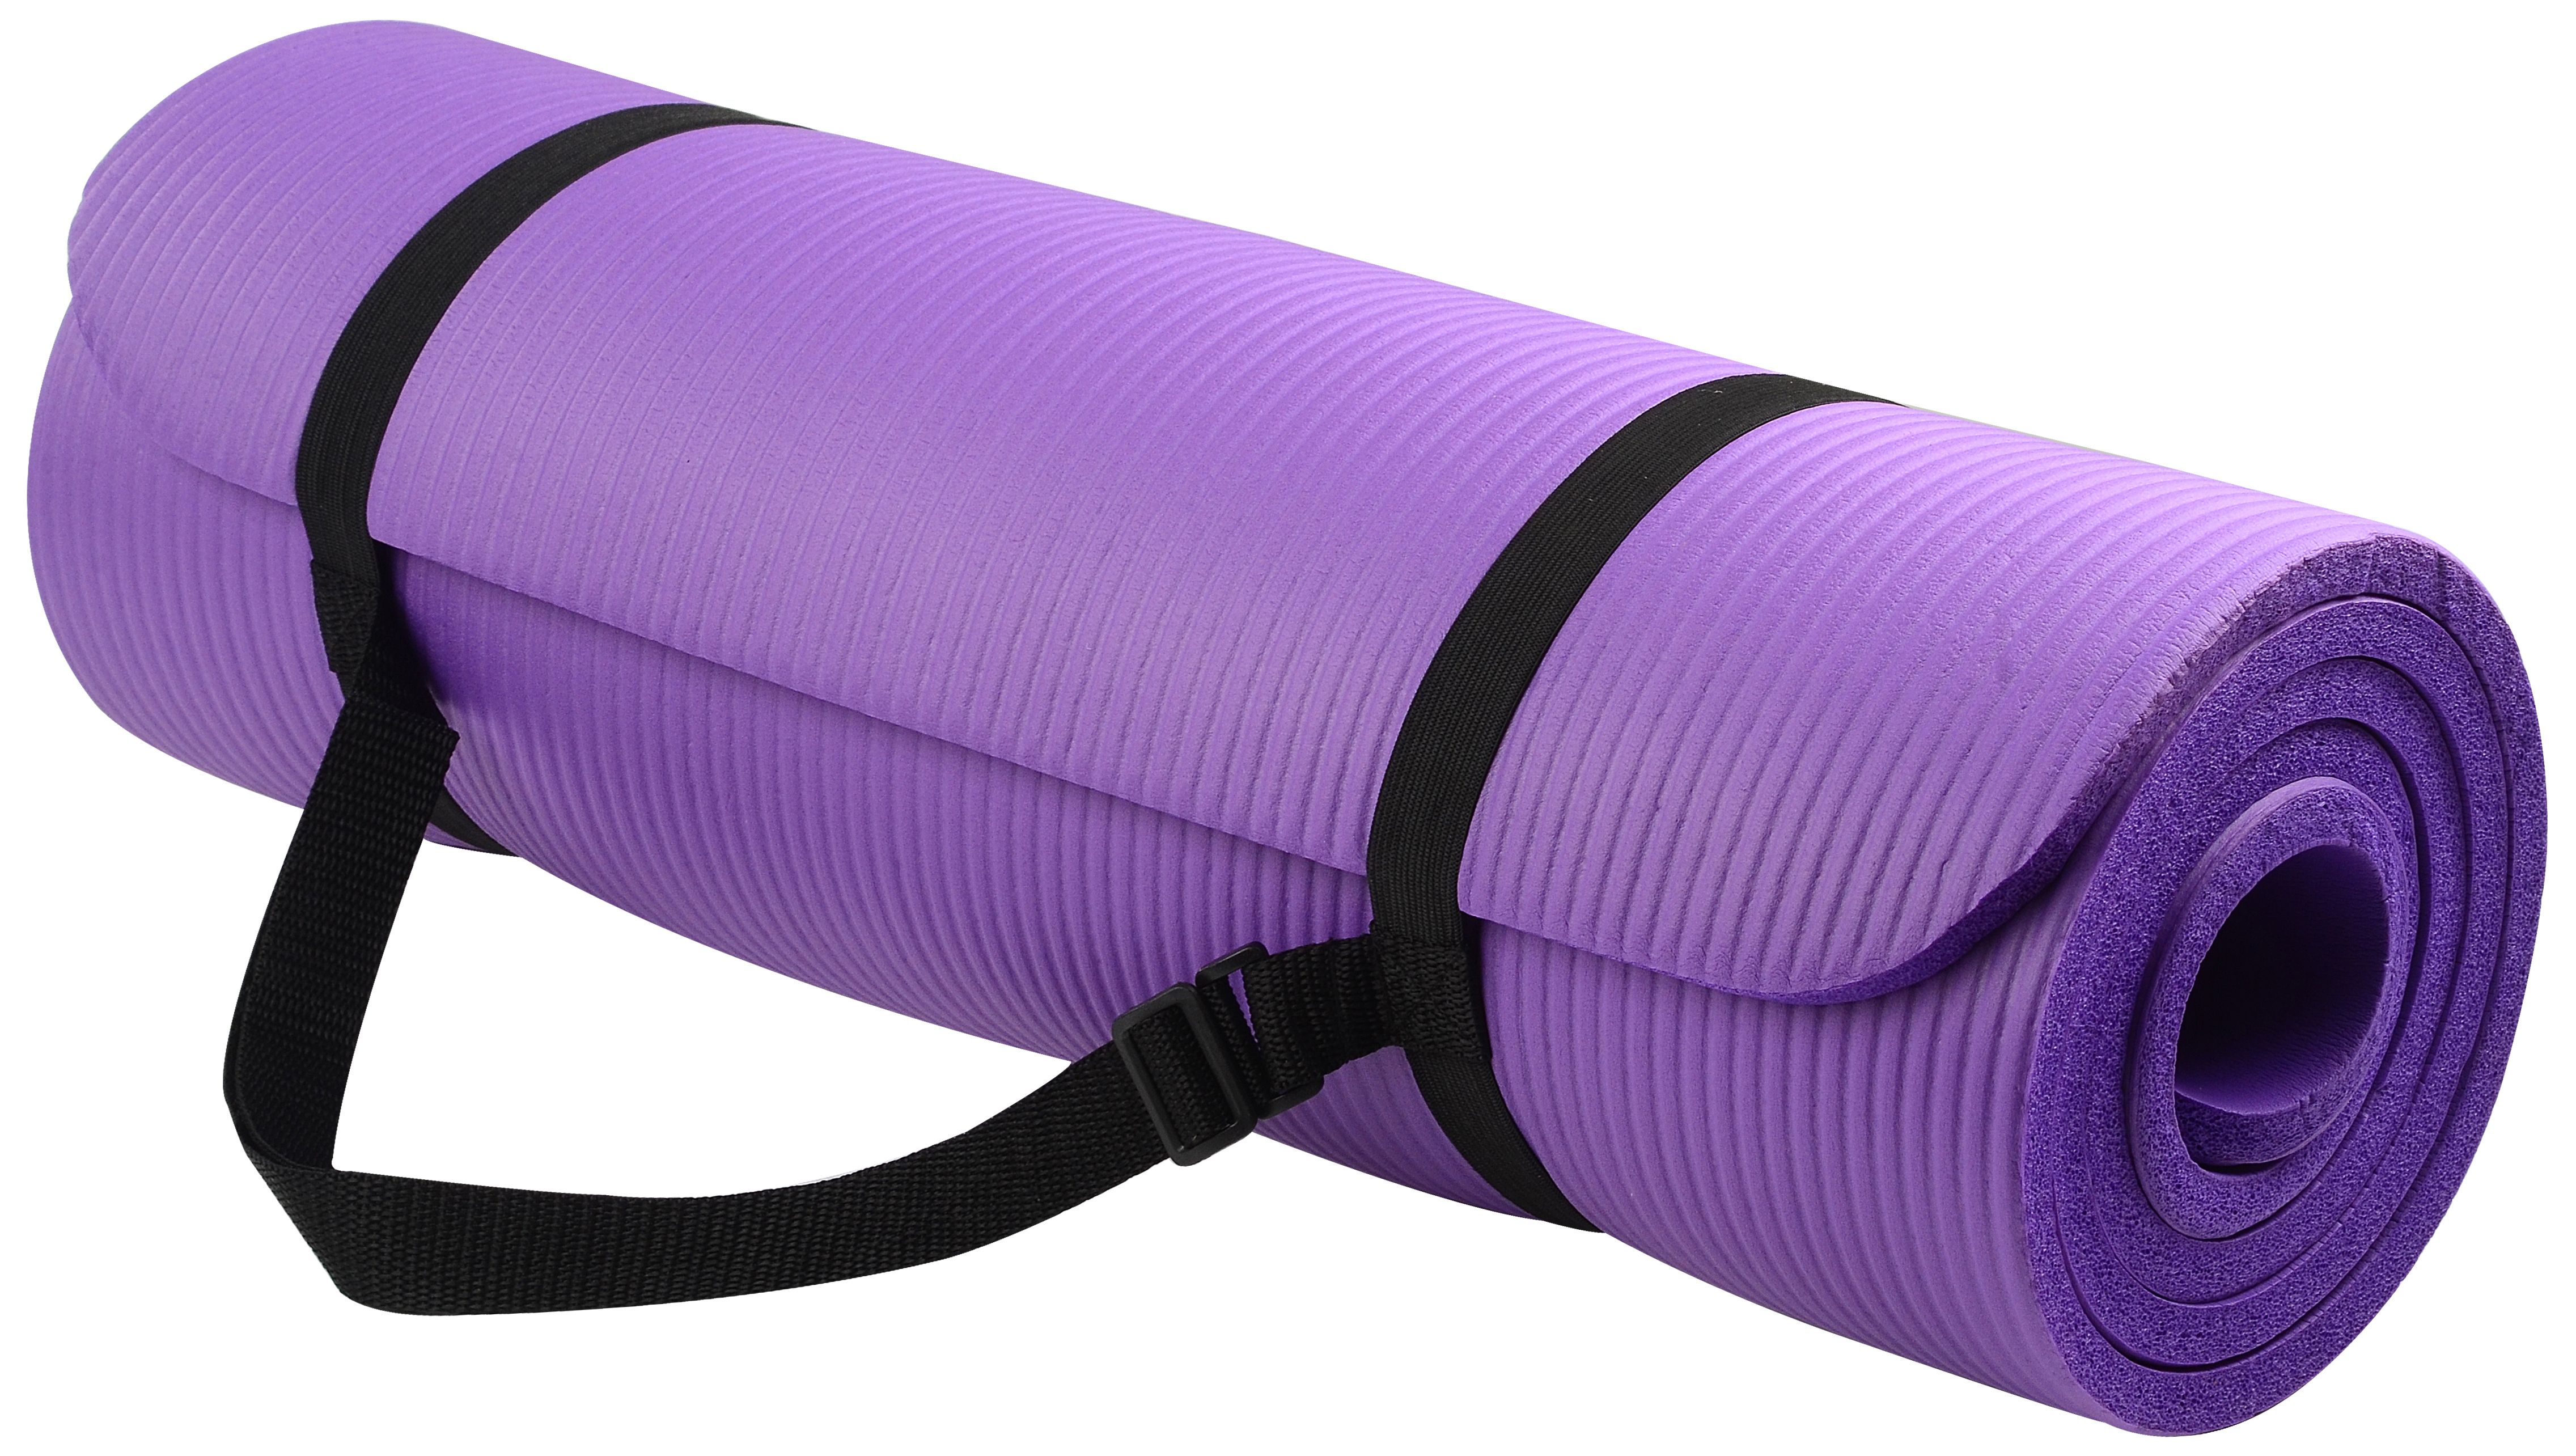 BalanceFrom All-Purpose 1/2 In. High Density Foam Exercise Yoga Mat Anti-Tear with Carrying Strap, Purple - image 1 of 5